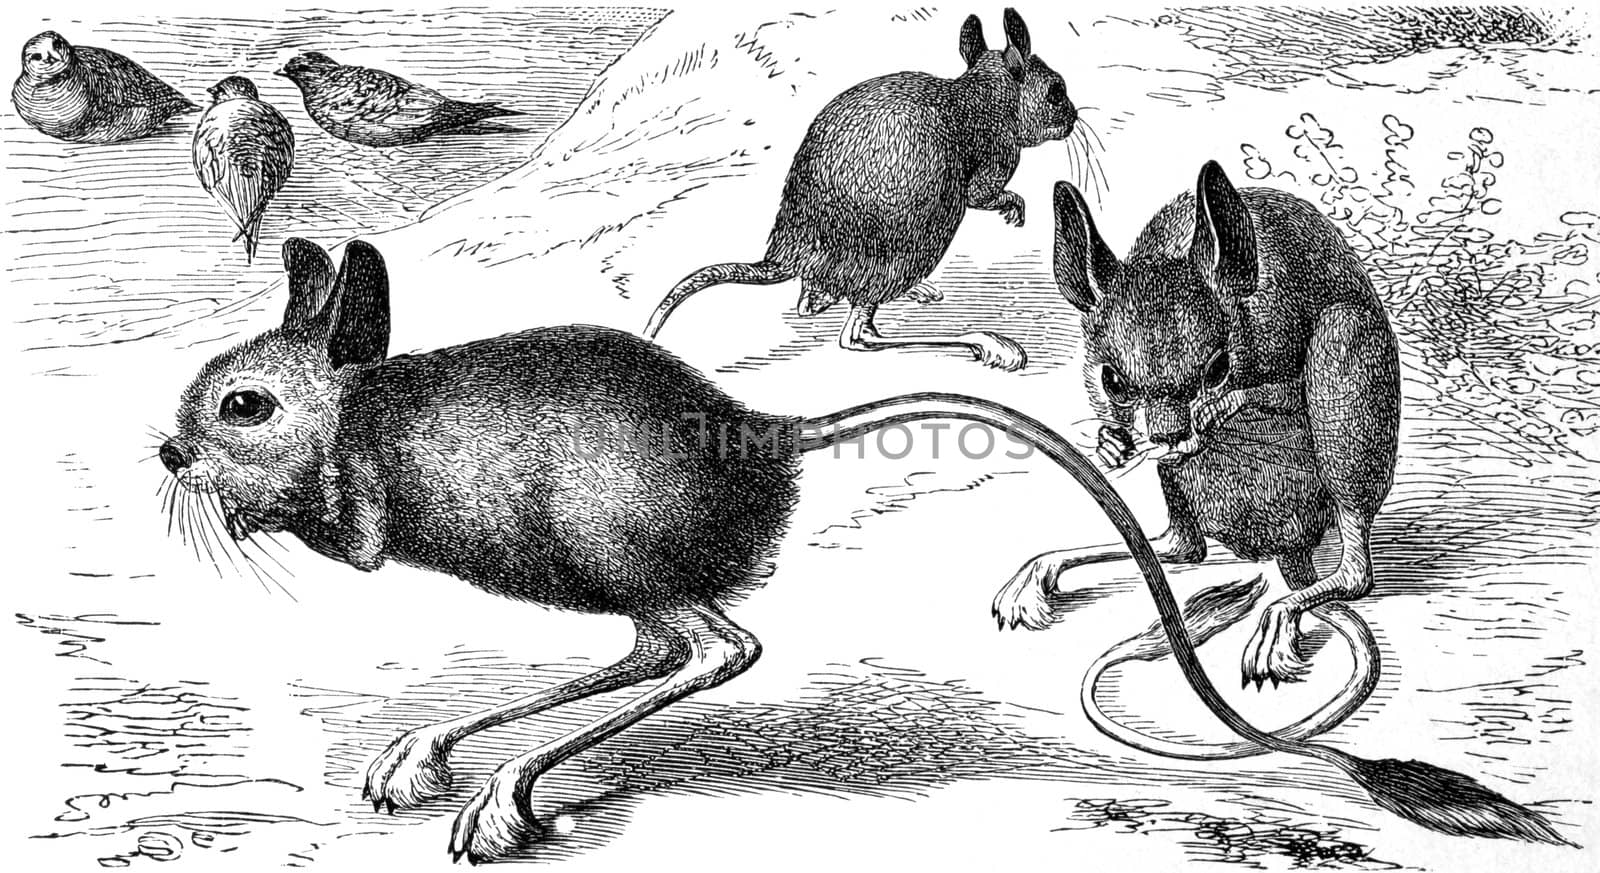 Egyptian Jerboa on engraving from 1890. Engraved by unknown artist and published in Meyers Konversations-Lexikon, Germany,1890.